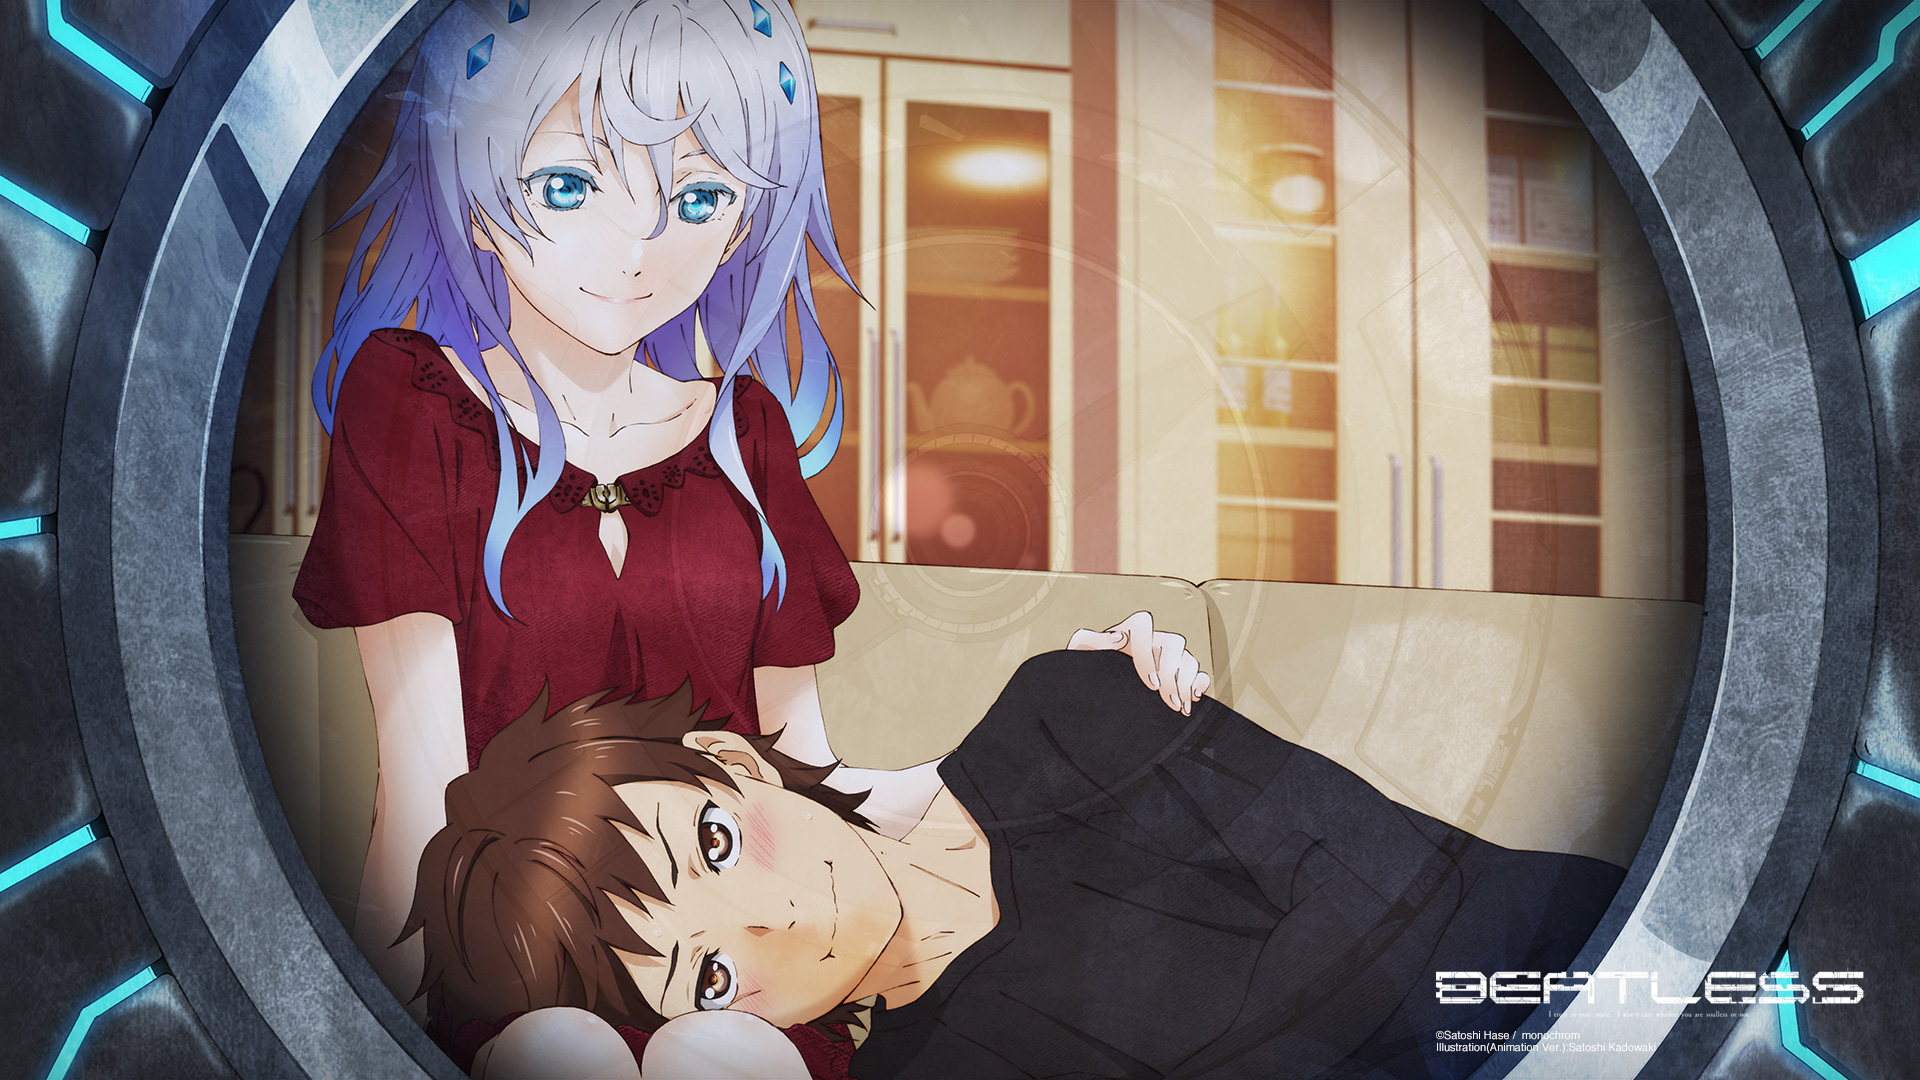 Experience the thrilling conclusion of BEATLESS in the Final Stage!